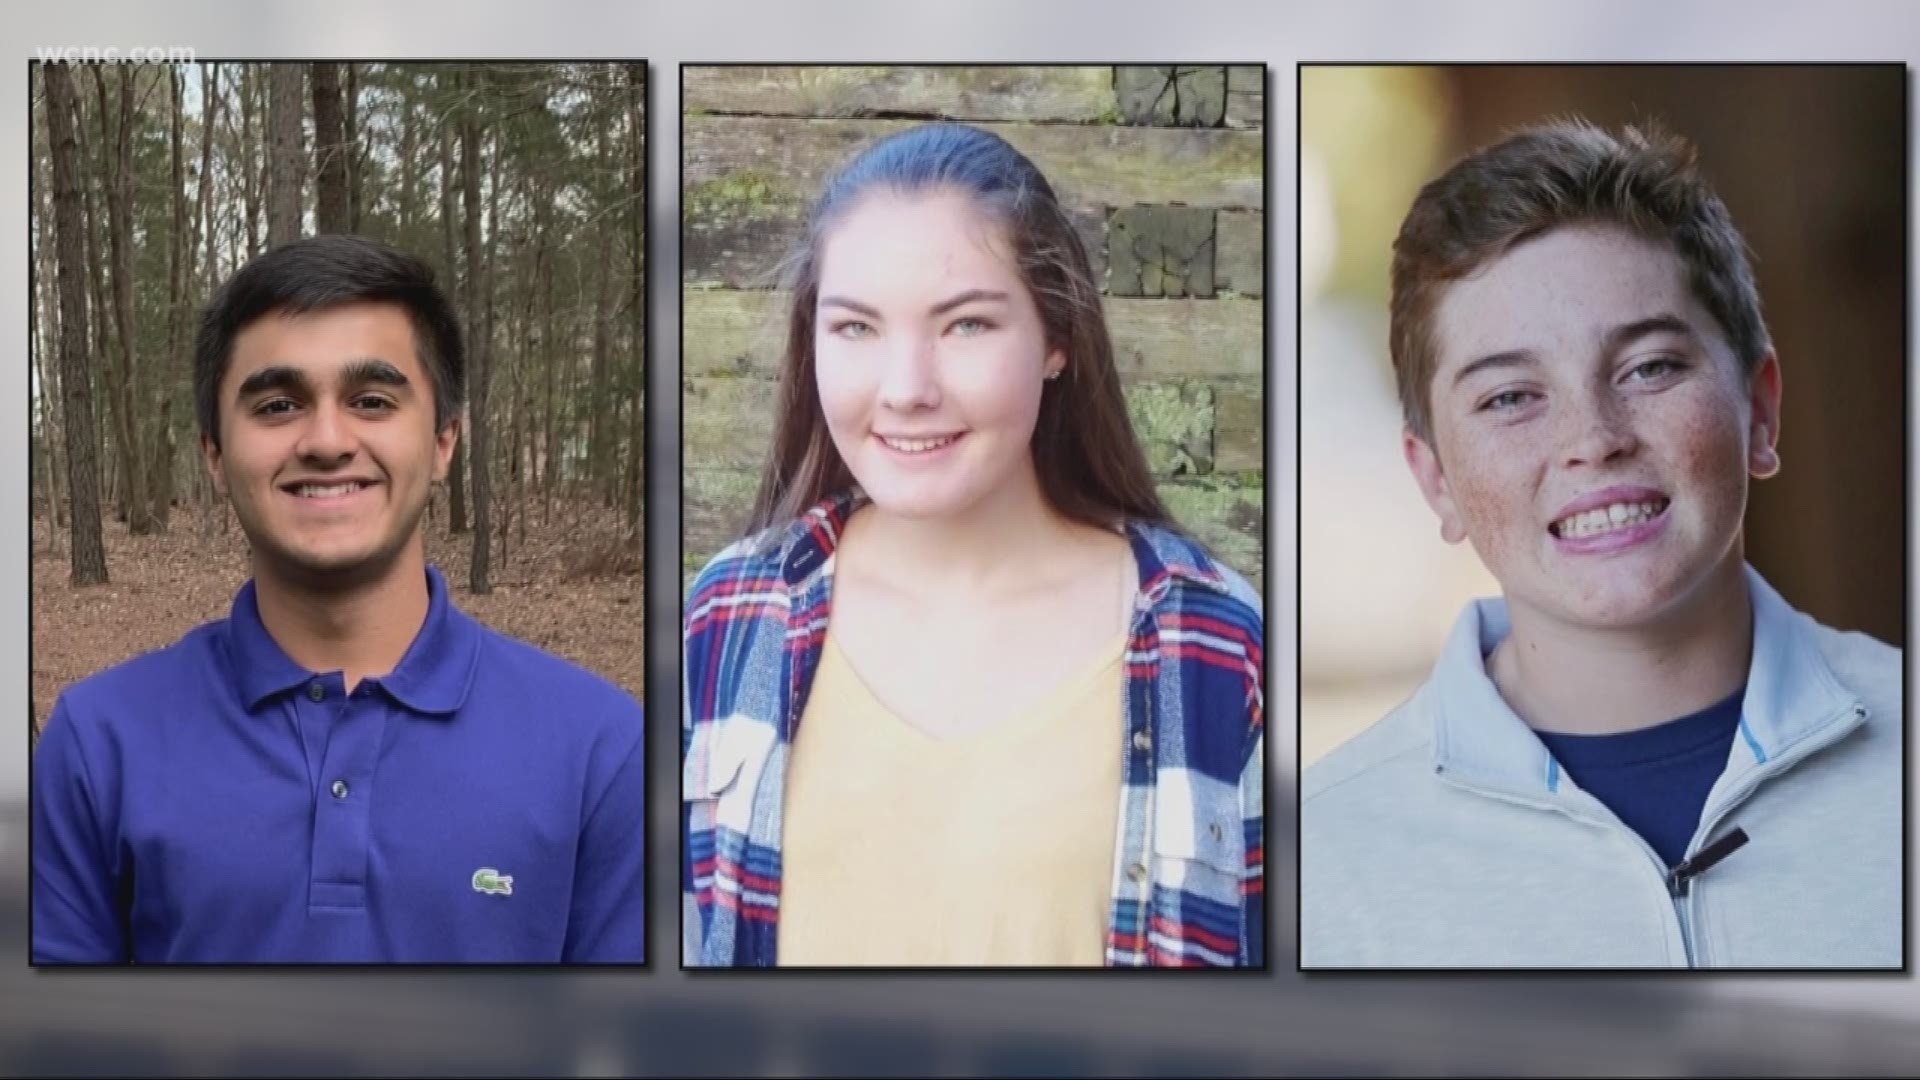 All three of the teens have type 1 diabetes. They are taking part in the Juvenile Diabetes Research Foundation's Children's Congress, hoping to push lawmakers to fund new research.